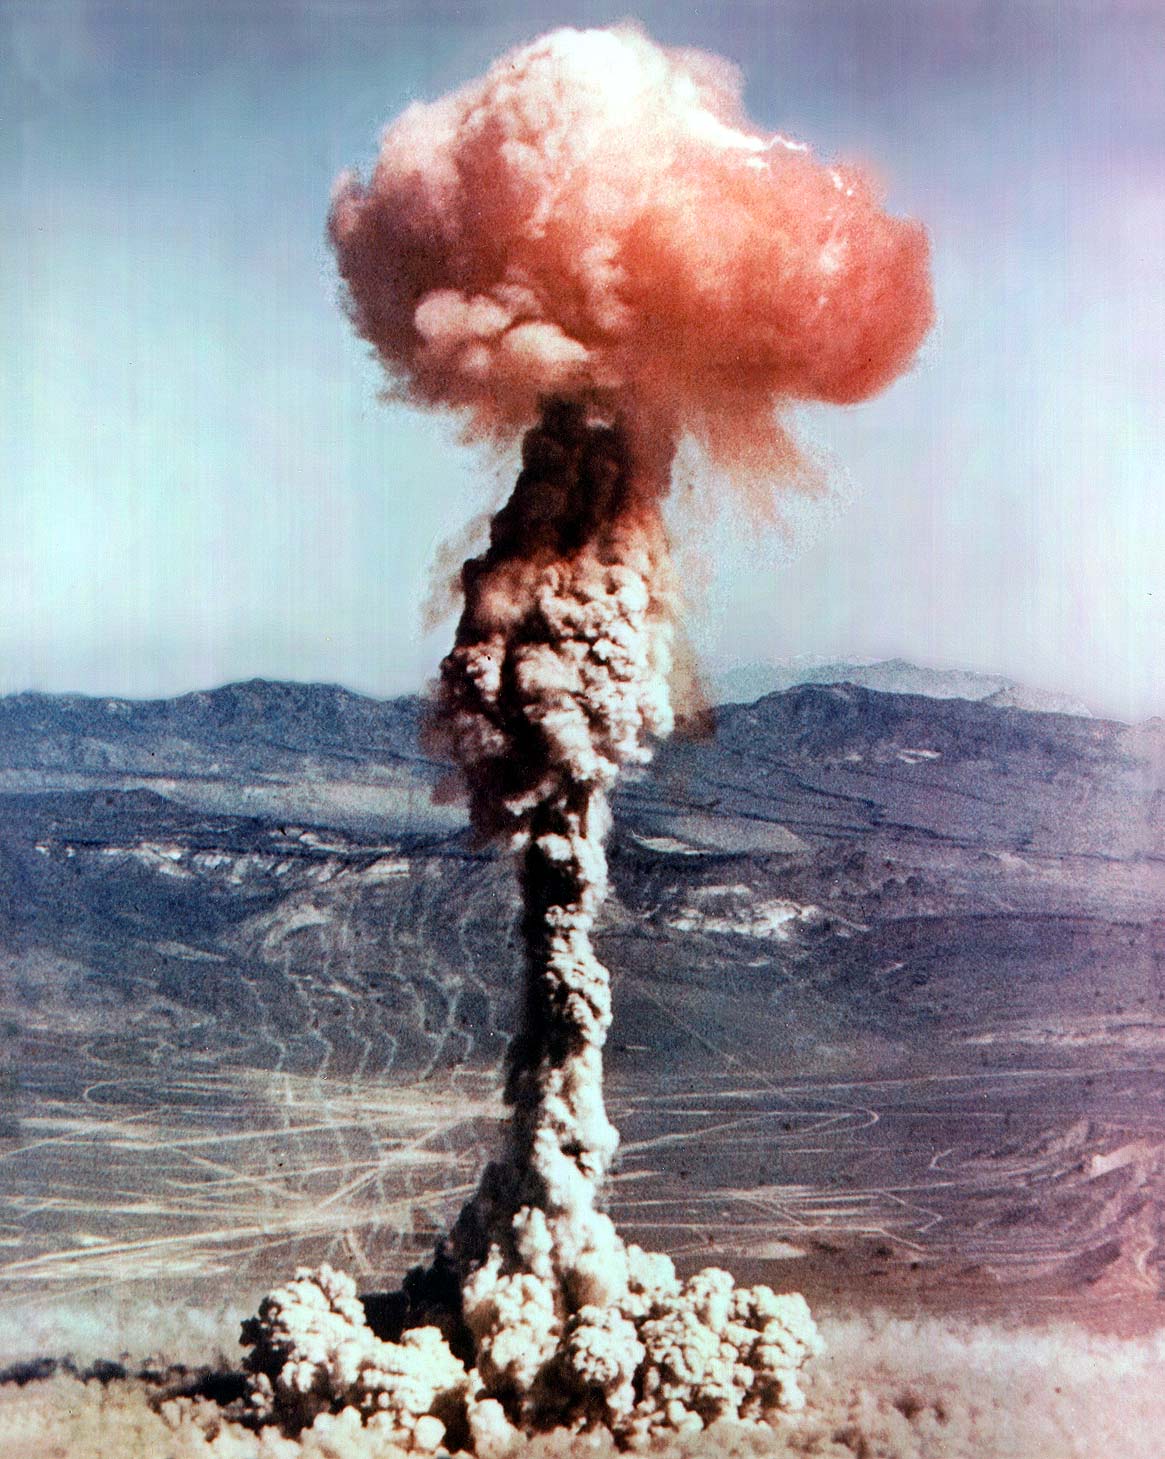 CHARLIE
CHARLIE a 14 kiloton device was dropped from a B-50 bomber on October 30, 1951 at Yucca Flat. The test, part of the Buster-Jangle series, was the eighth detonation at the Nevada Proving Grounds.
Keywords: Nevada Test Site, Mercury, Nye County, Nevada NTS